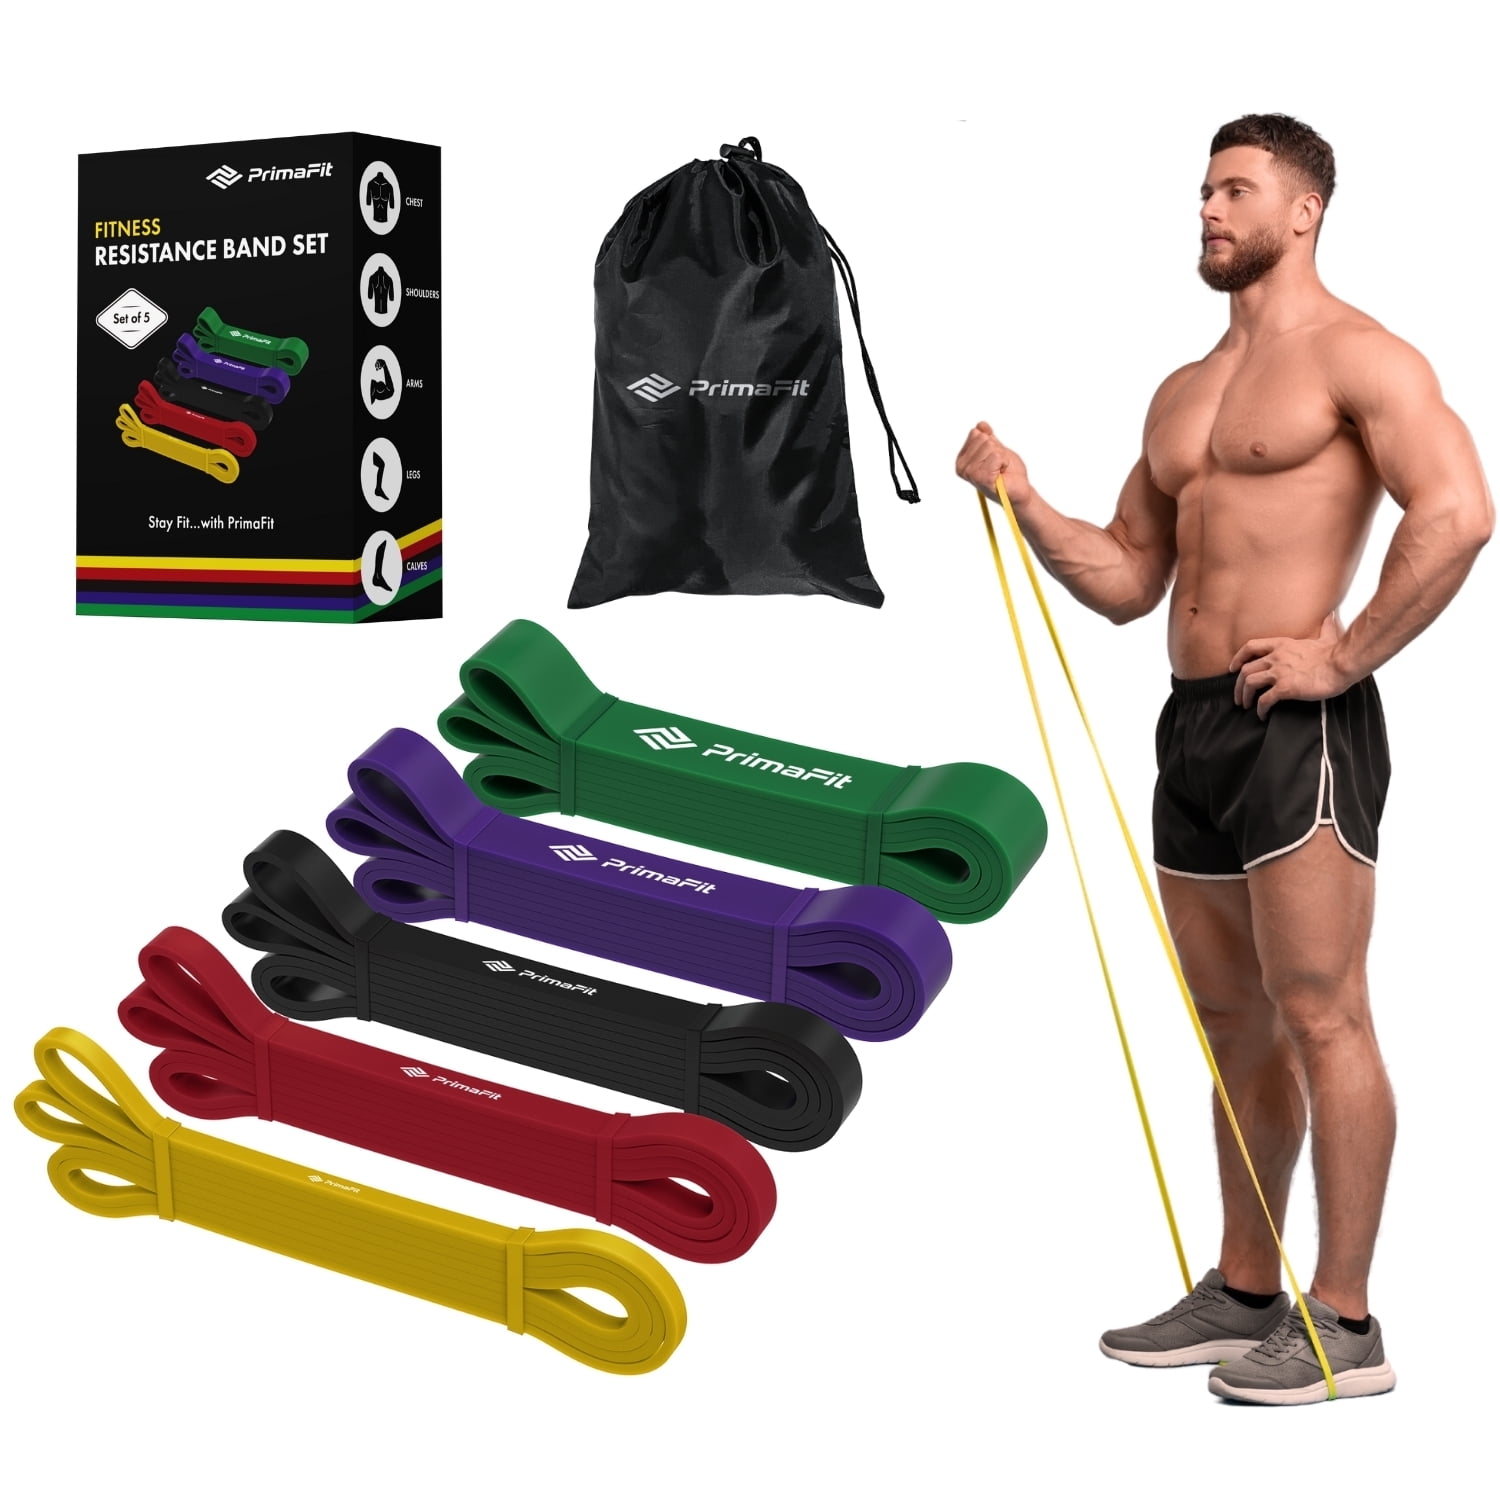 Resistance Bands Exercise Bands Workout Bands - Up to 150lb